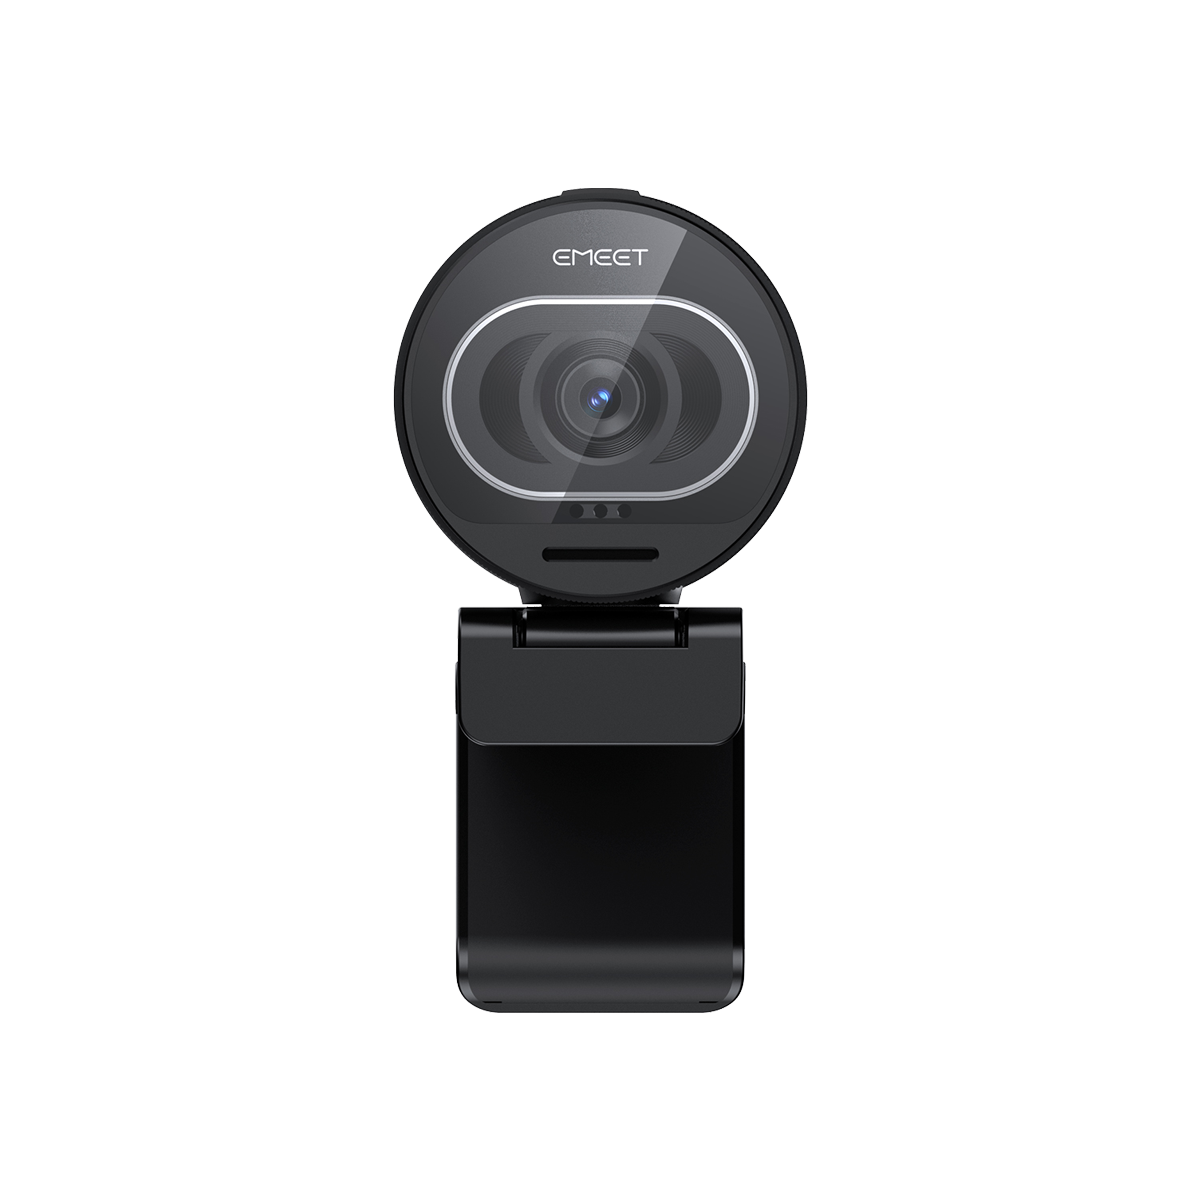  1080P Webcam with Microphone, C960 Web Camera, 2 Mics Streaming  Webcam, 90°View Computer Camera, Plug and Play USB Webcam for Online  Calling/Conferencing, Zoom/Skype/Facetime/, Laptop/Desktop :  Electronics